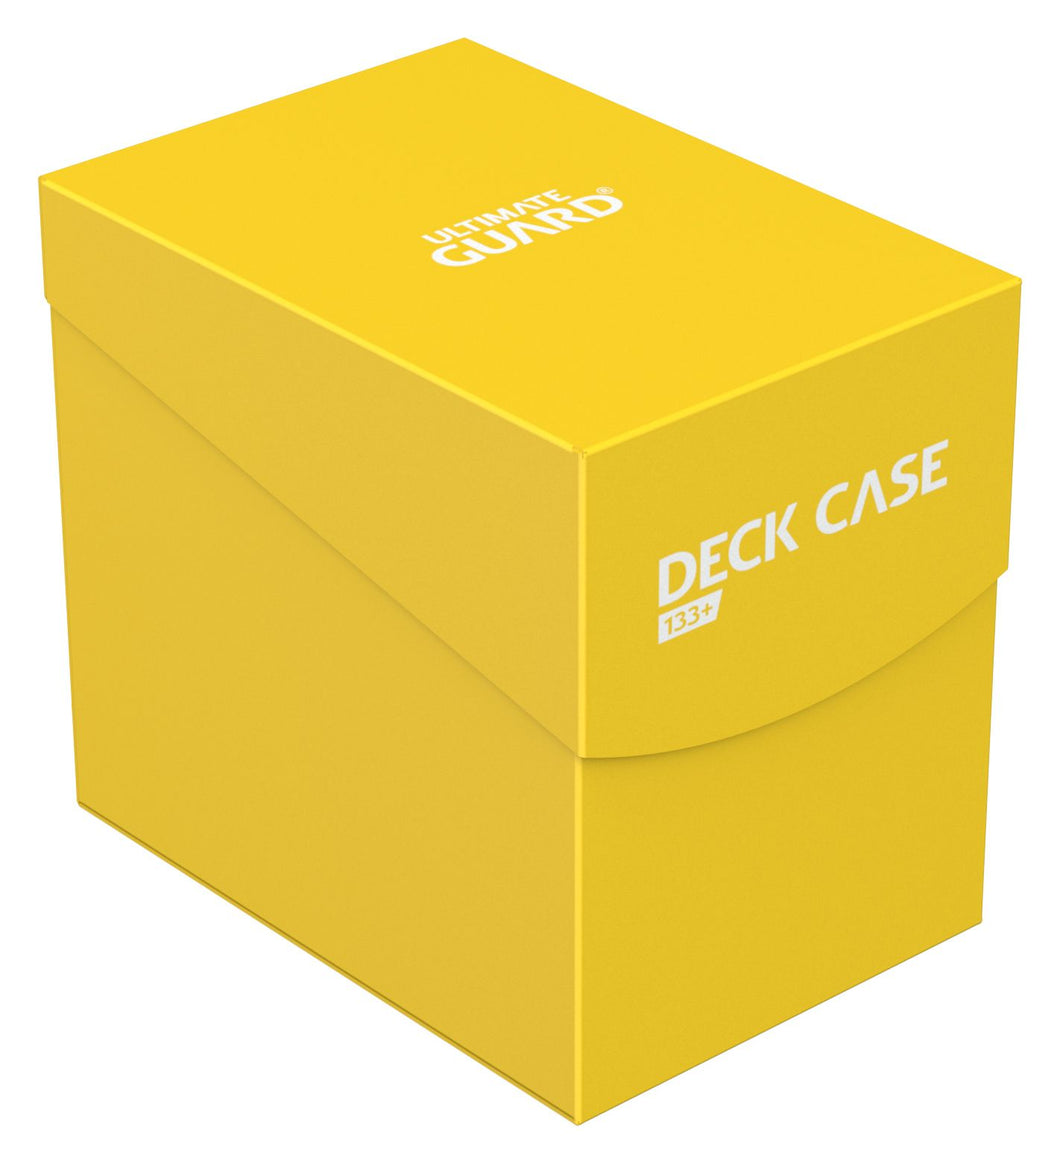 Ultimate Guard Deck Case 133+ (Yellow)